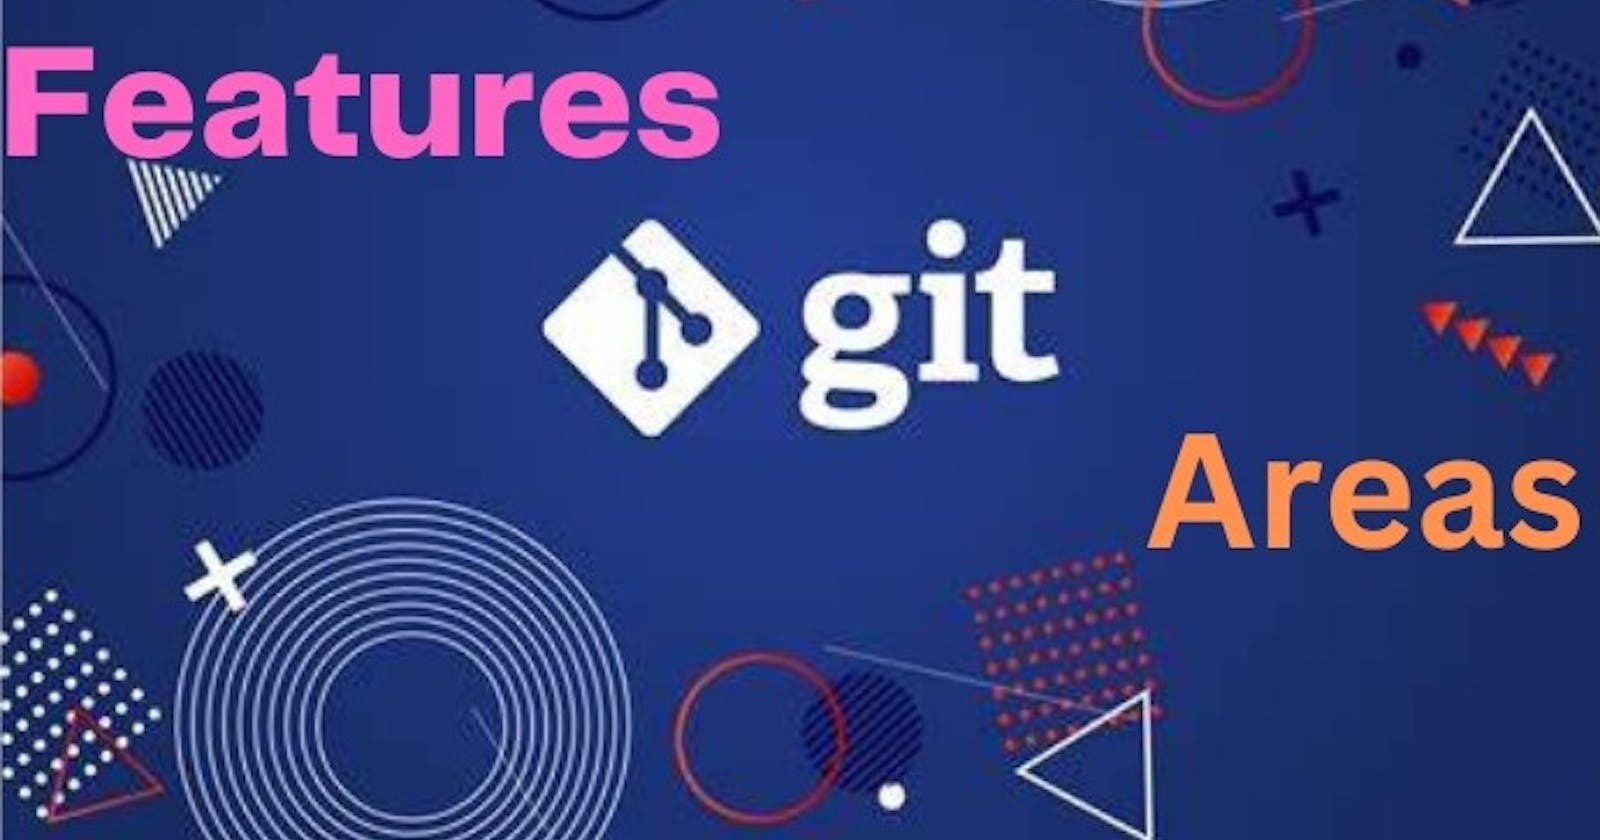 3. Features Of Git & Areas In Git